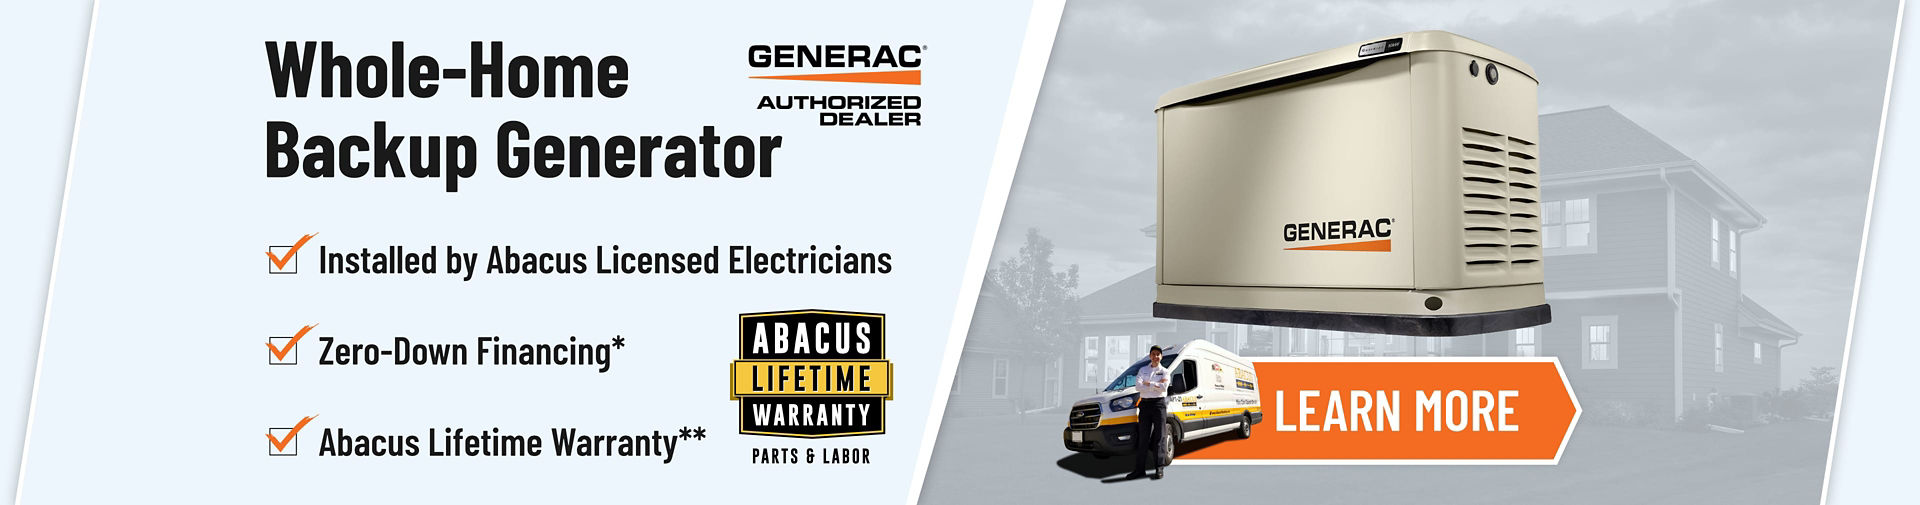 Whole home backup generator. GENERAC Authorized Dealer. Click here to learn more,